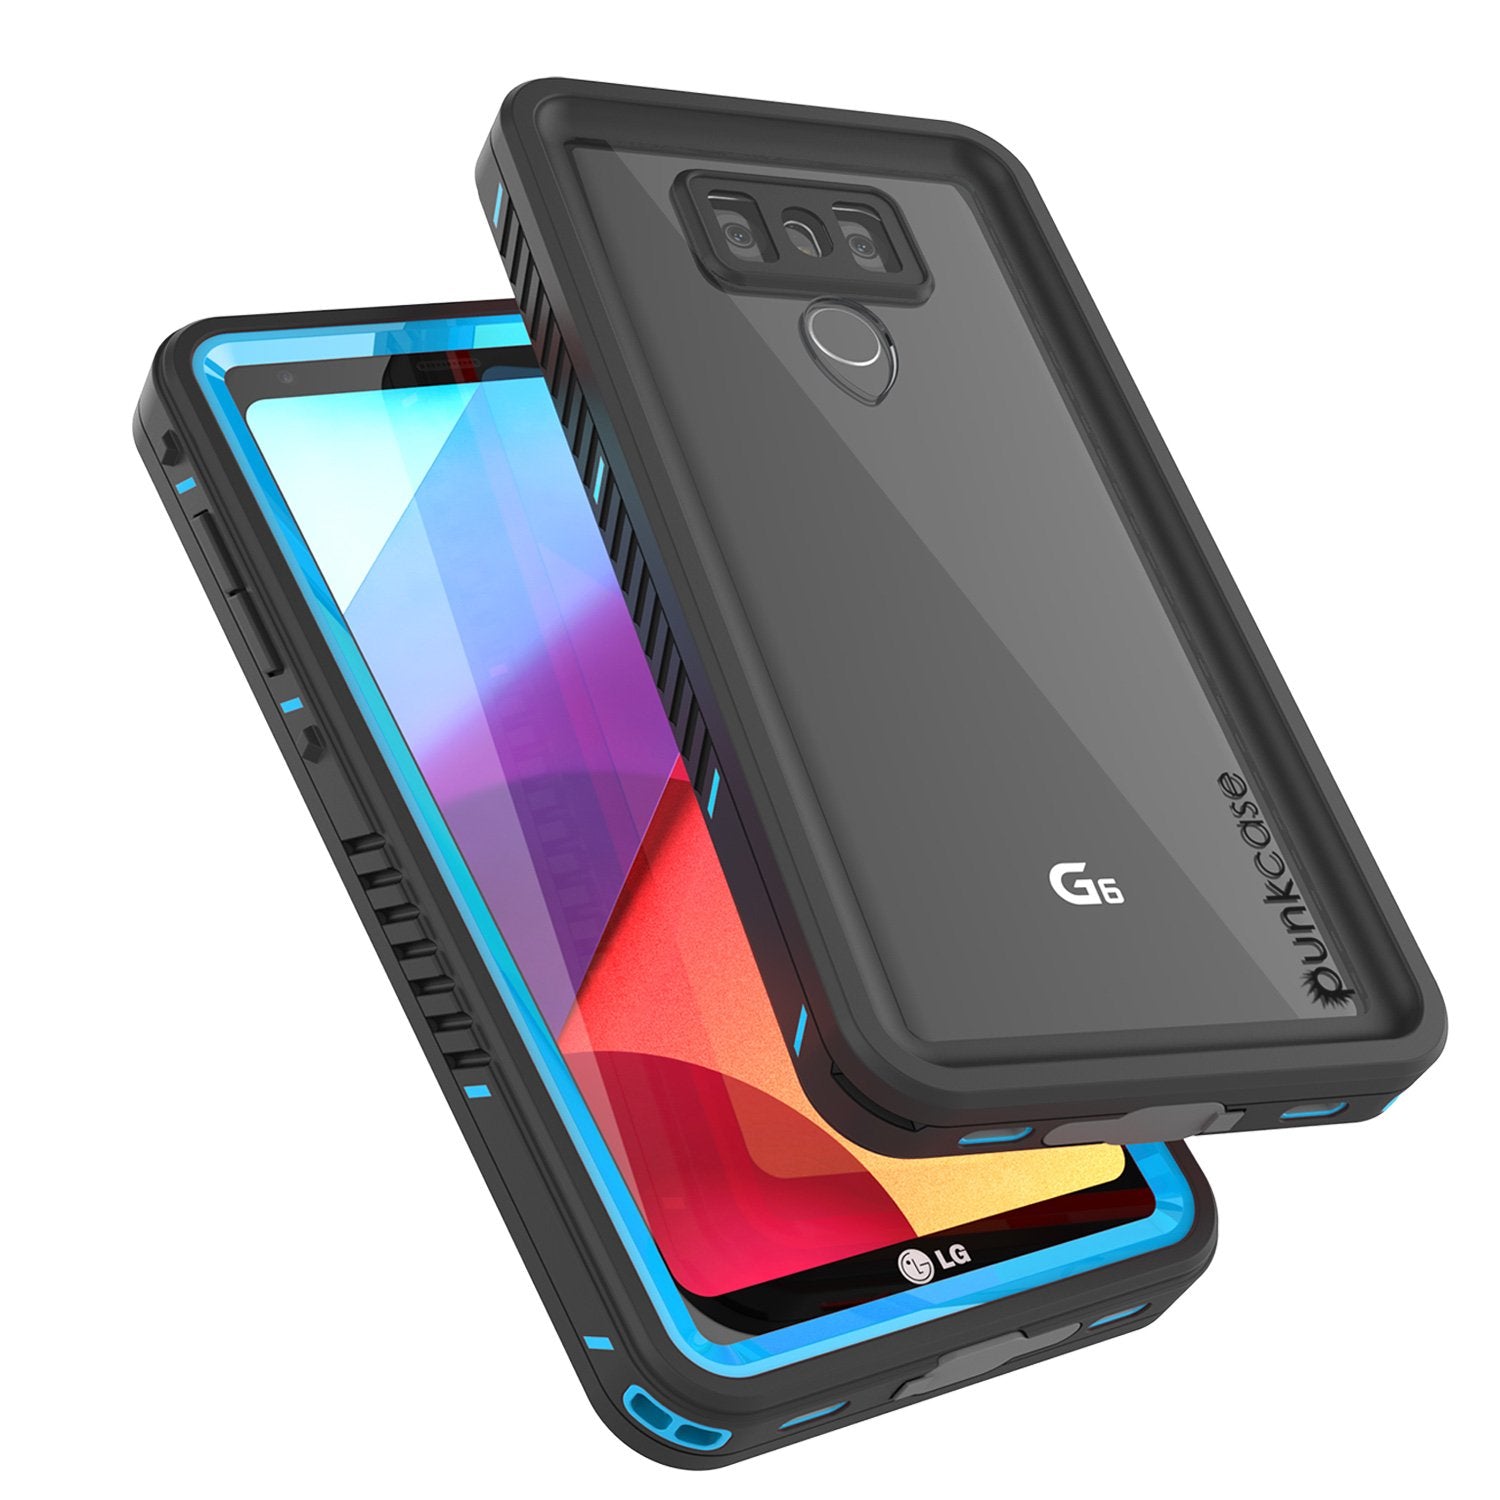 LG G6 Waterproof Case, Punkcase [Extreme Series] [Slim Fit] [IP68 Certified] [Shockproof] [Snowproof] [Dirproof] Armor Cover W/ Built In Screen Protector for LG G6 [BLUE]